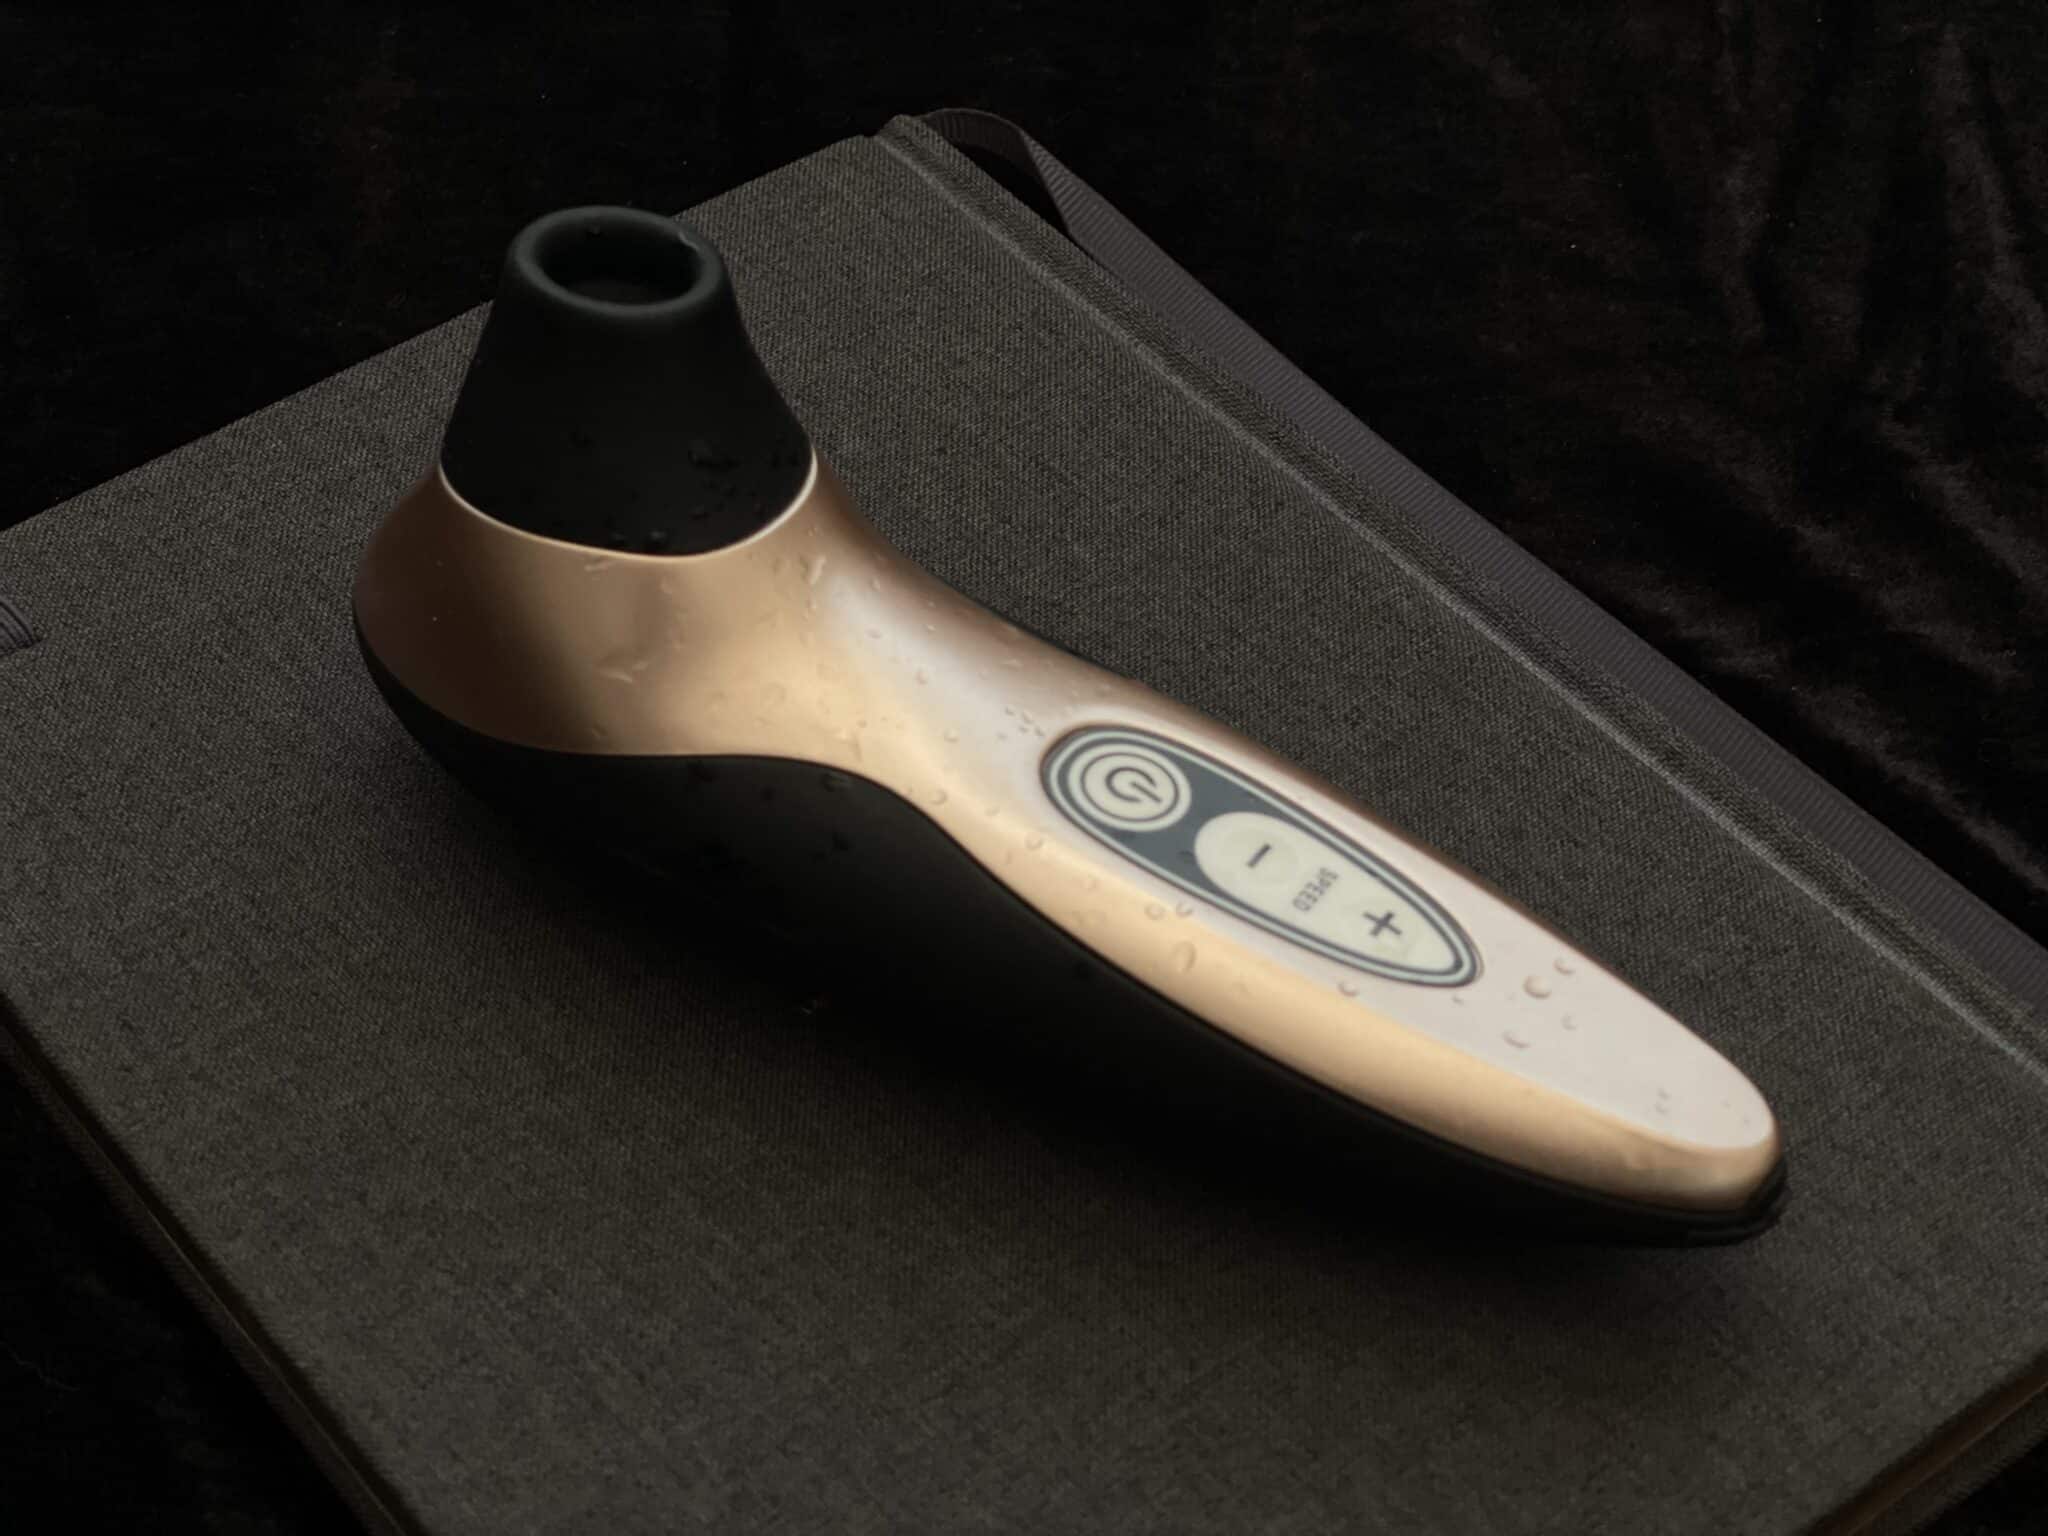 Womanizer Pro40 A Review of the Womanizer Pro40’s Quality